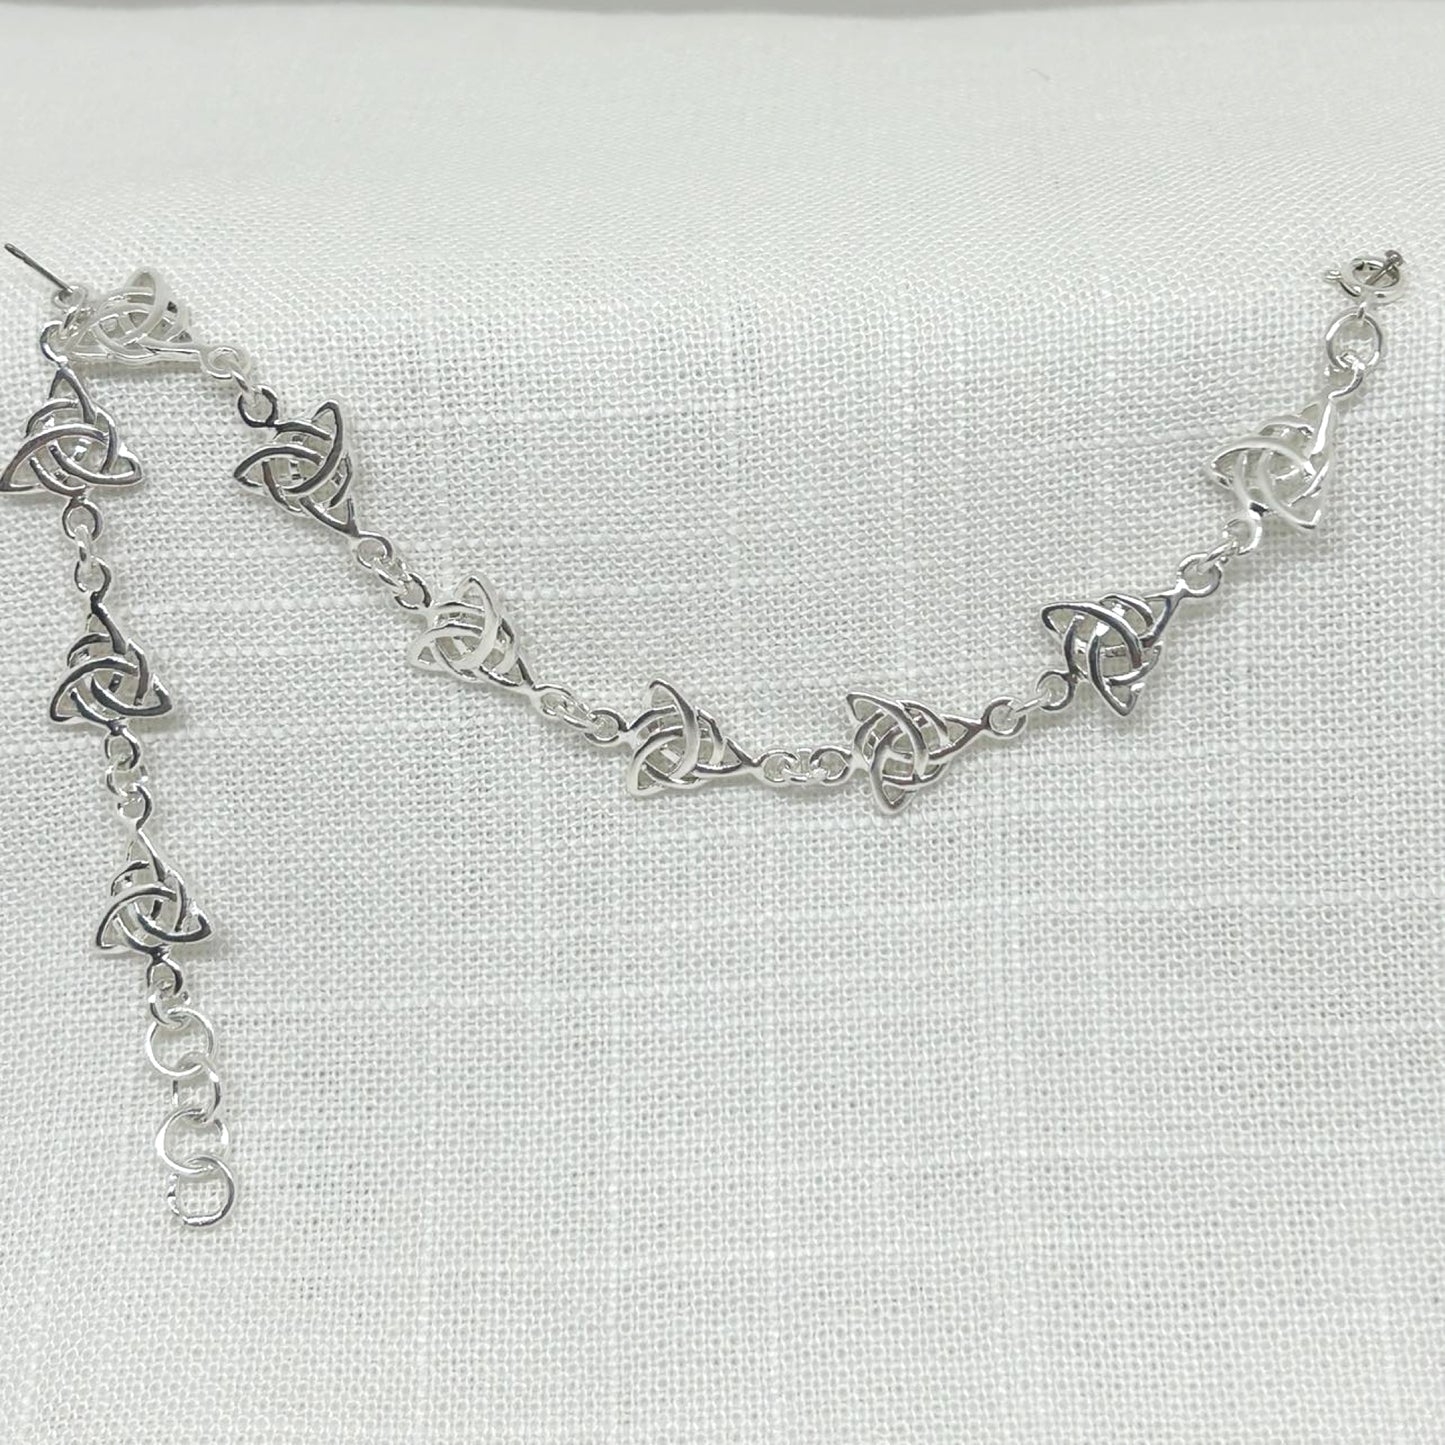 Made from .925 silver, this beautiful bracelet features 10 Triquetra symbols. The Triquetra is associated with the Maiden, Mother and Crone, the triple aspects of the Goddess in ancient Pagan Celtic times. Size is approx 7.75inches and adjustable up to 8.5 inches. All jewellery comes gift boxed.